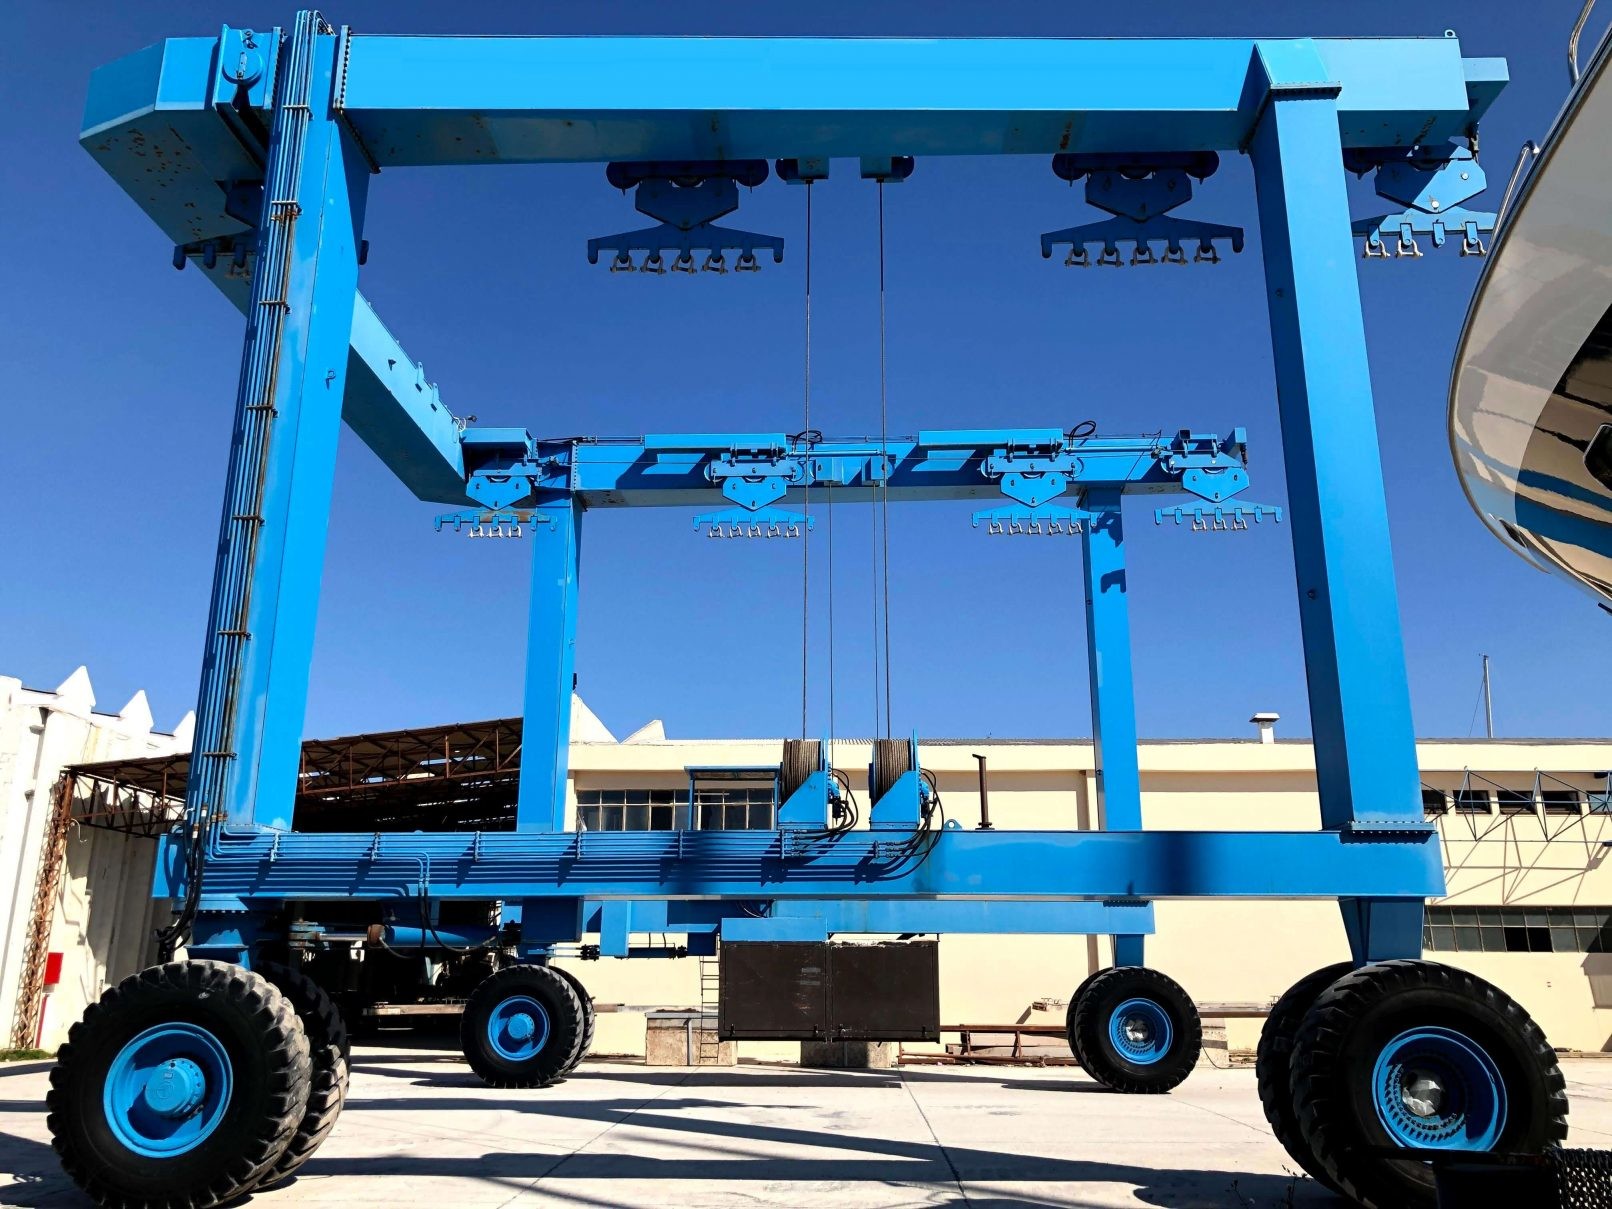 20-500T New Products Mobile Boat Lift Yacht Lift Gantry Crane